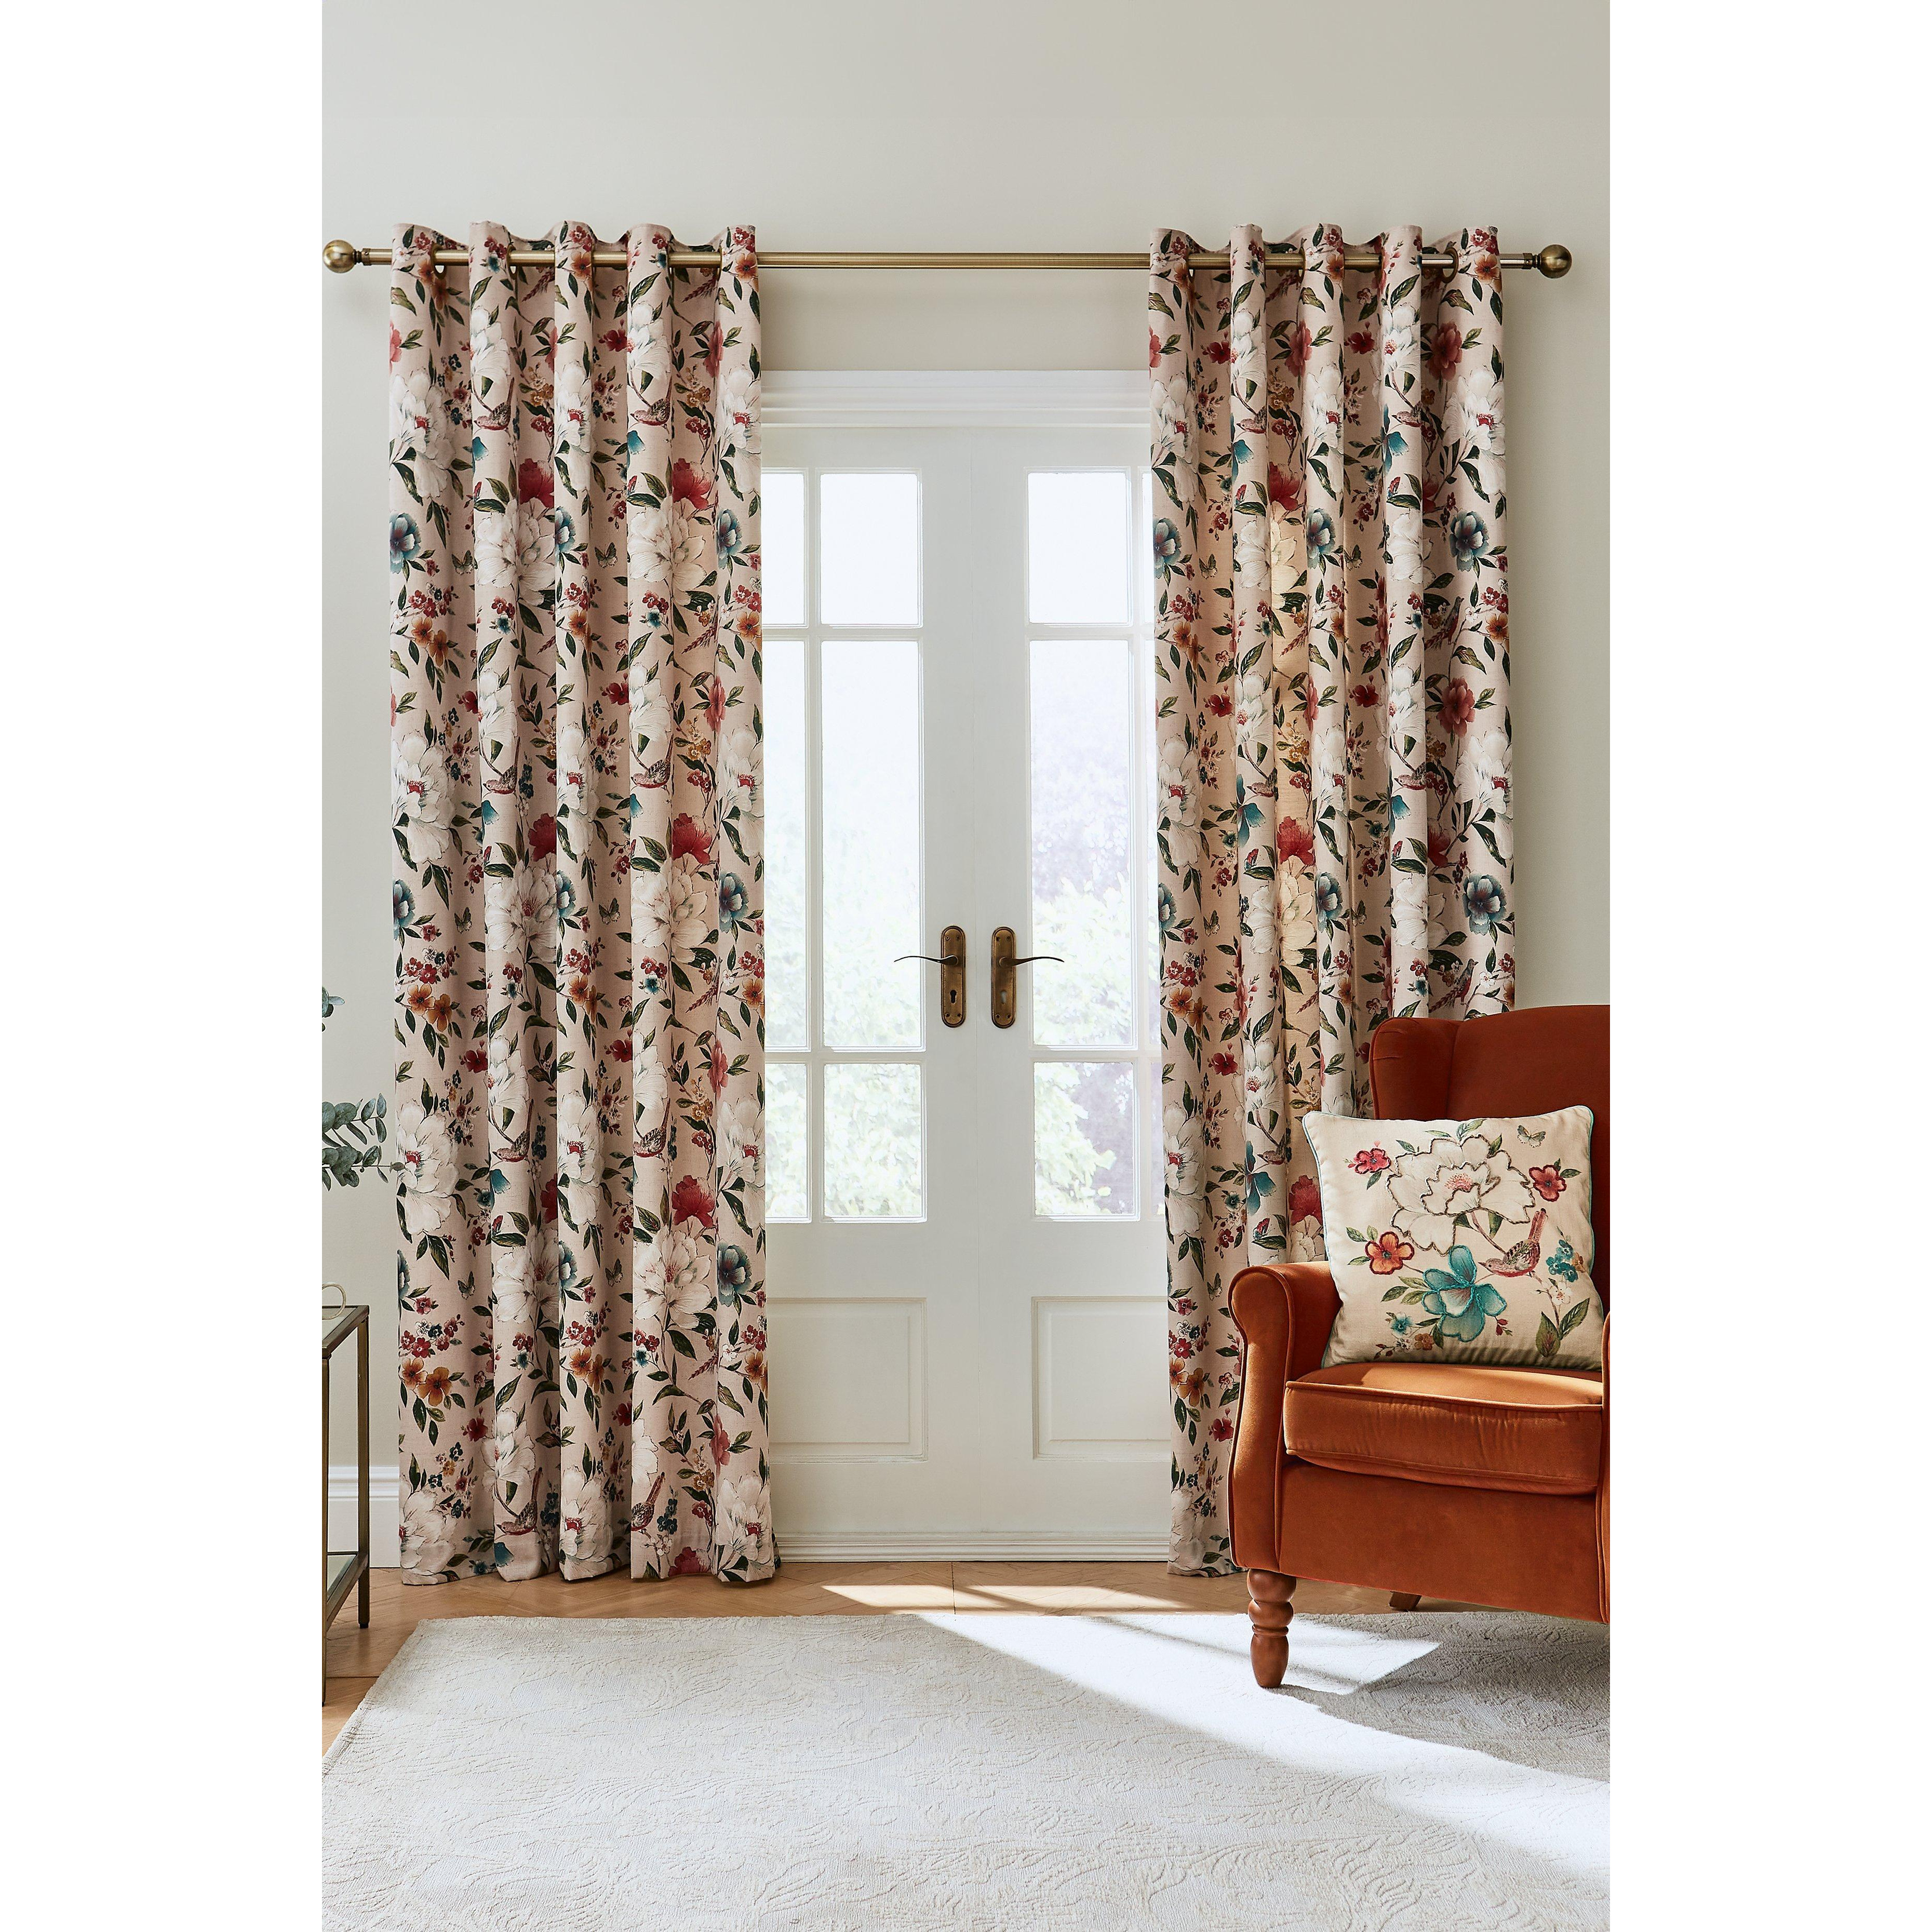 'Pipa' Thermal Lined Eyelet Curtains - image 1